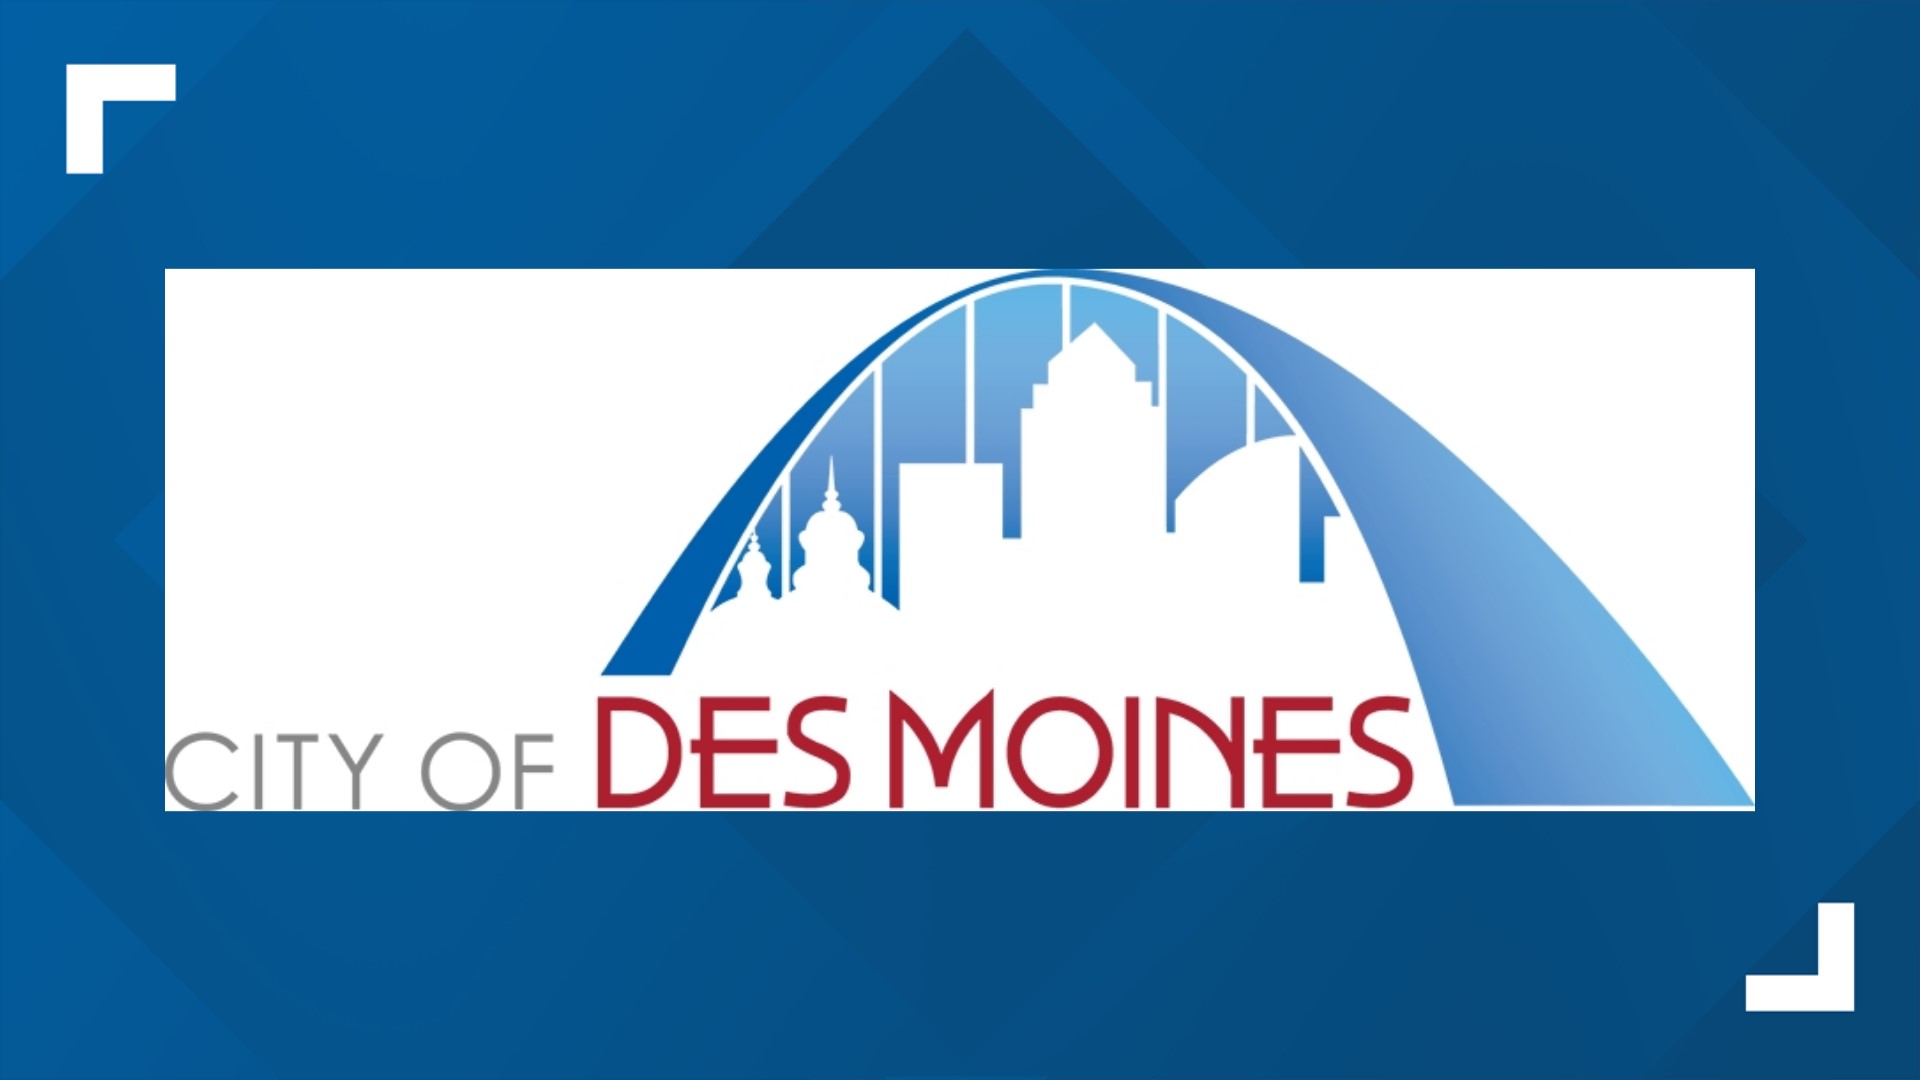 Here's what happened at the Des Moines City Council on Monday, July 17.